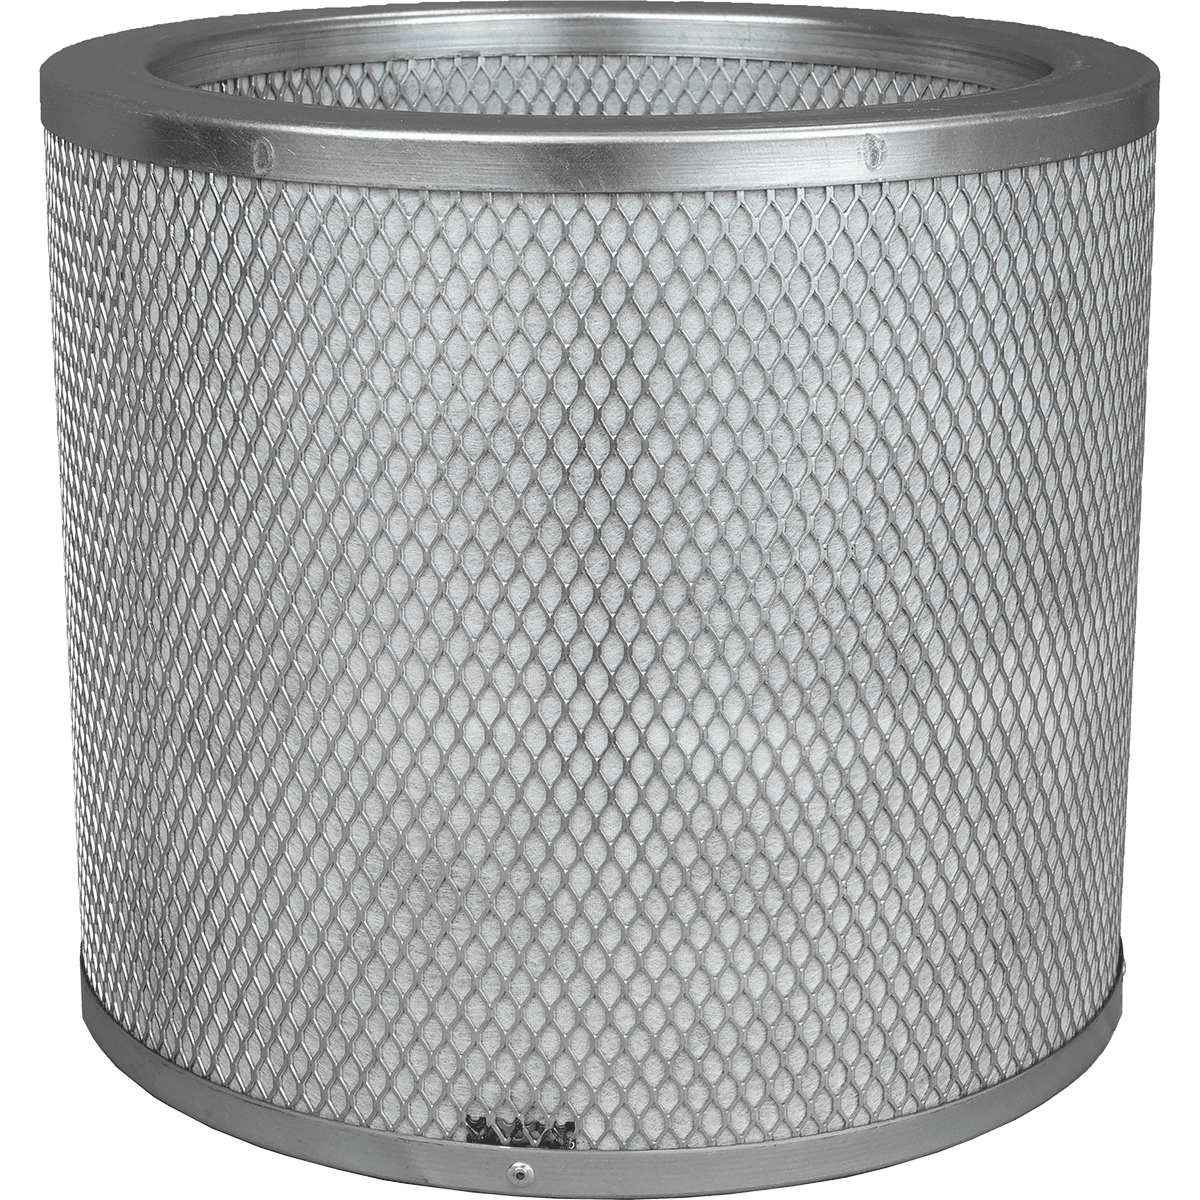 Airpura R400 Replacement Carbon Filter